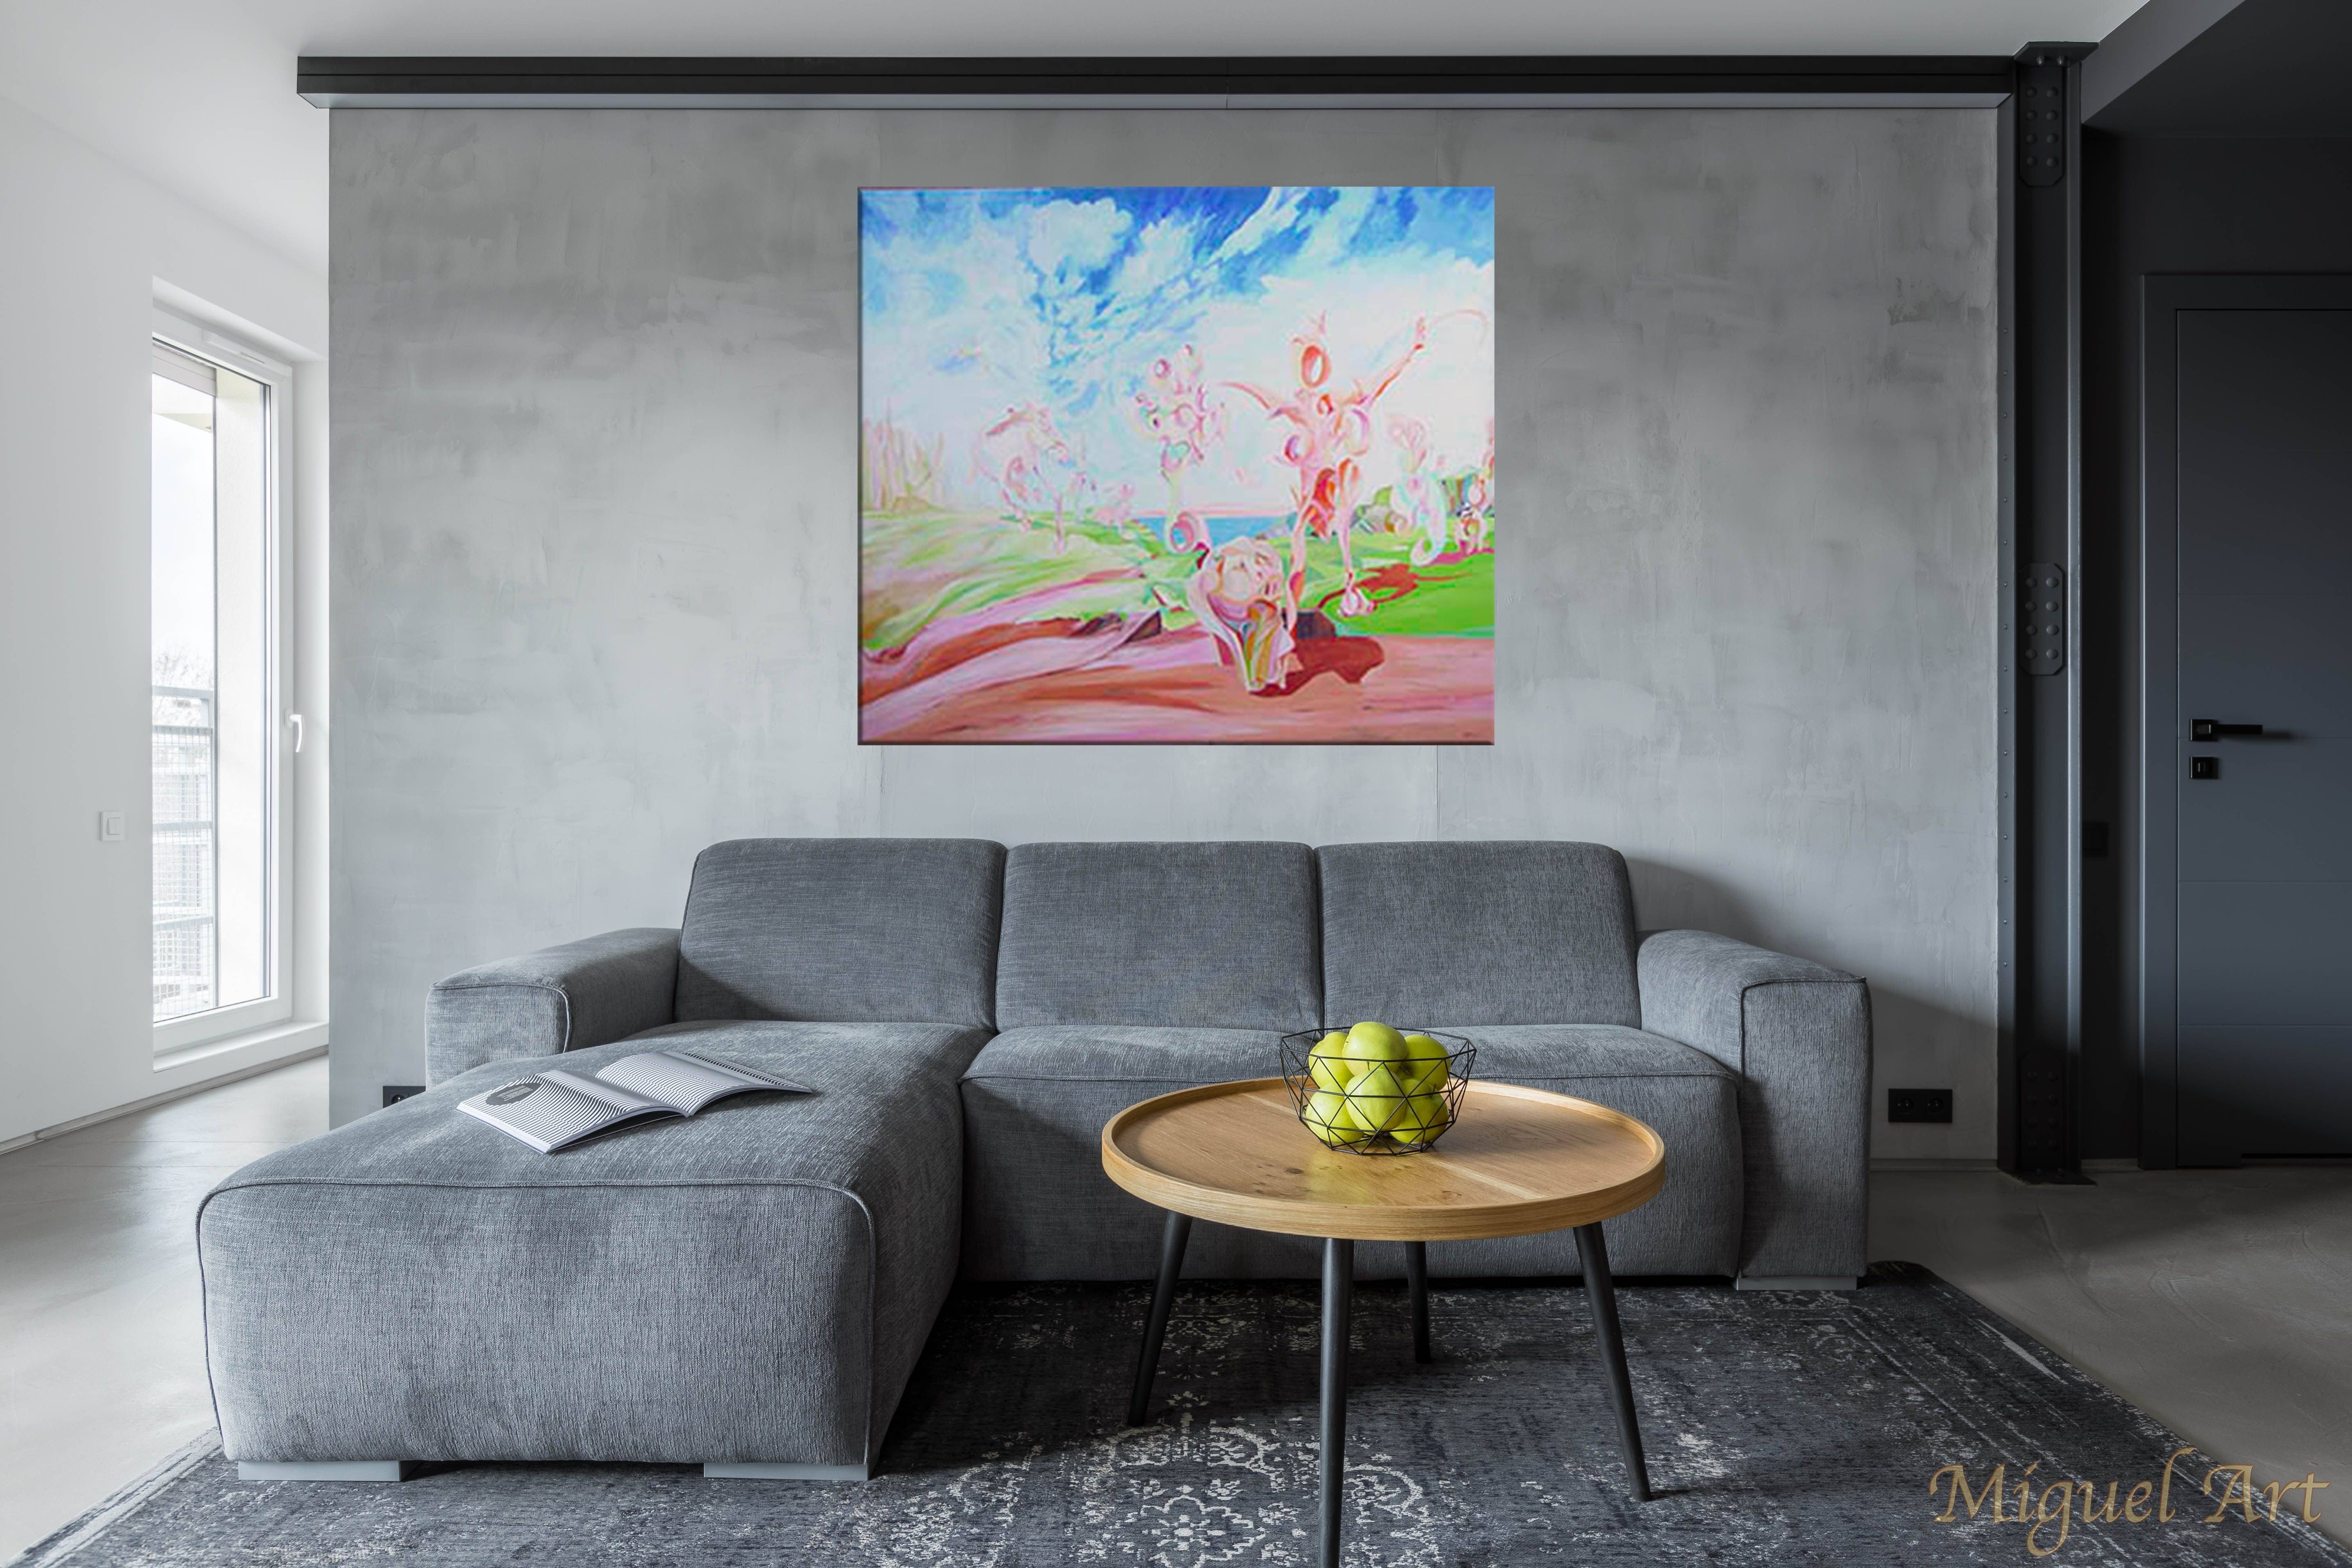 Painting of Sur displayed on the wall above a grey couch